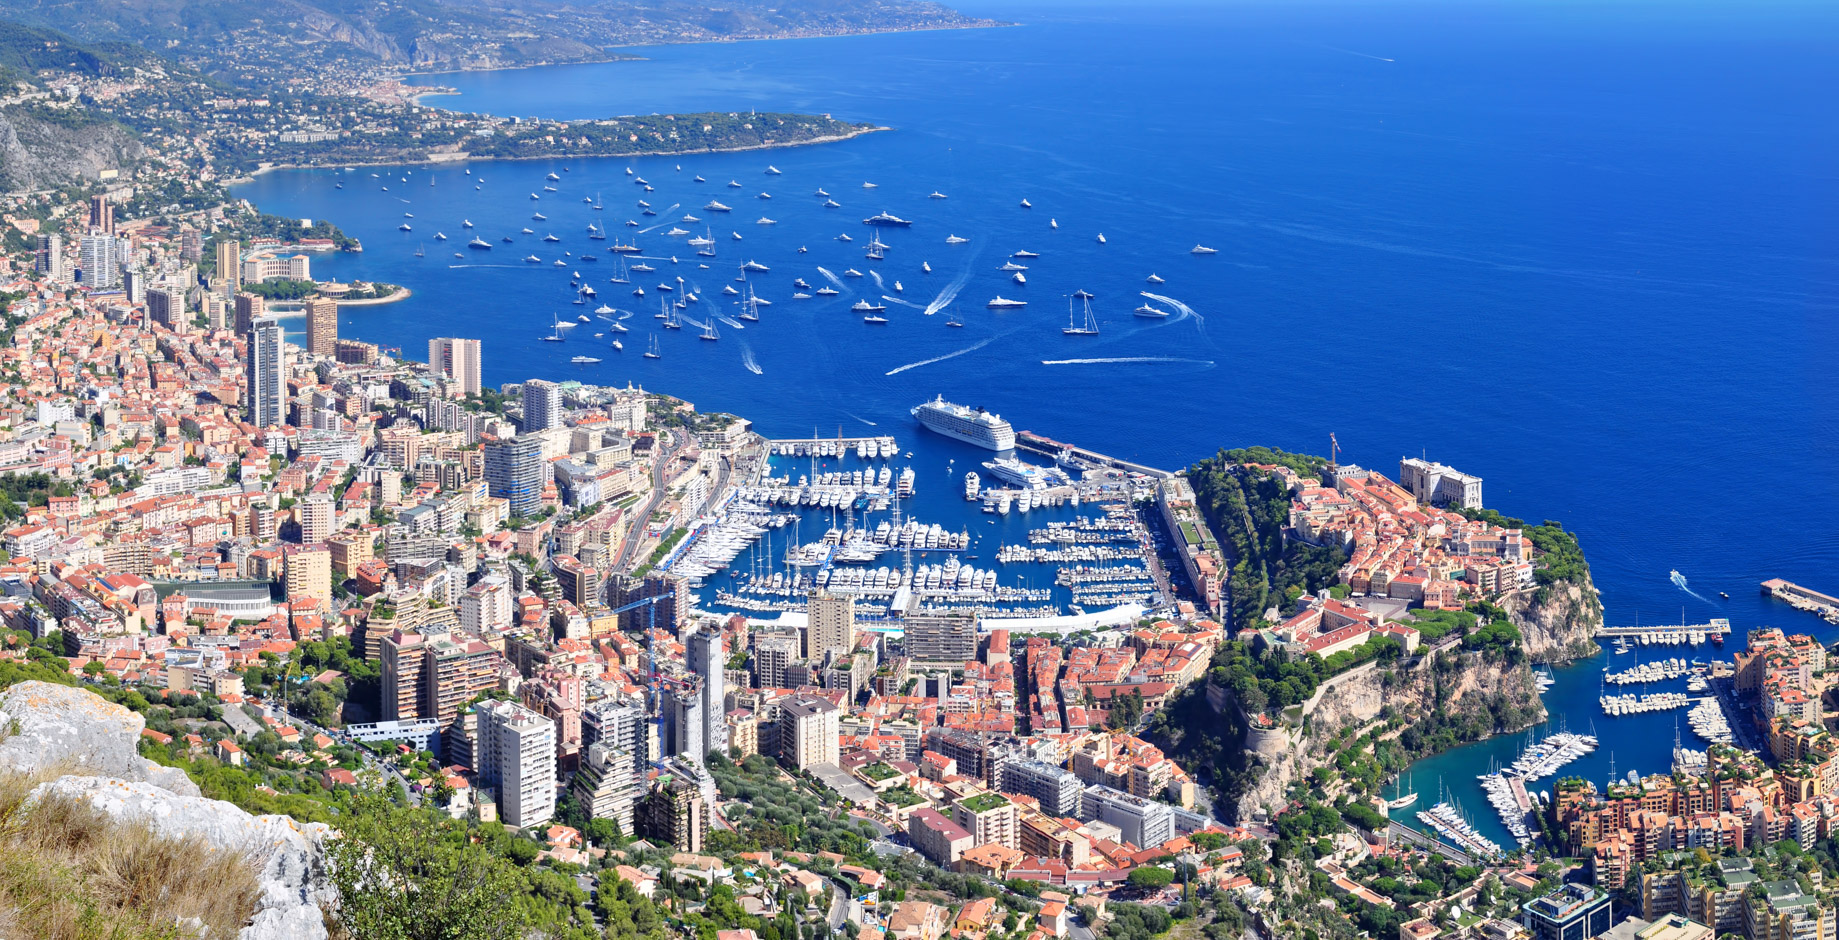 House Hunting in Monaco – Inside One of the Worlds Most Expensive Property Markets